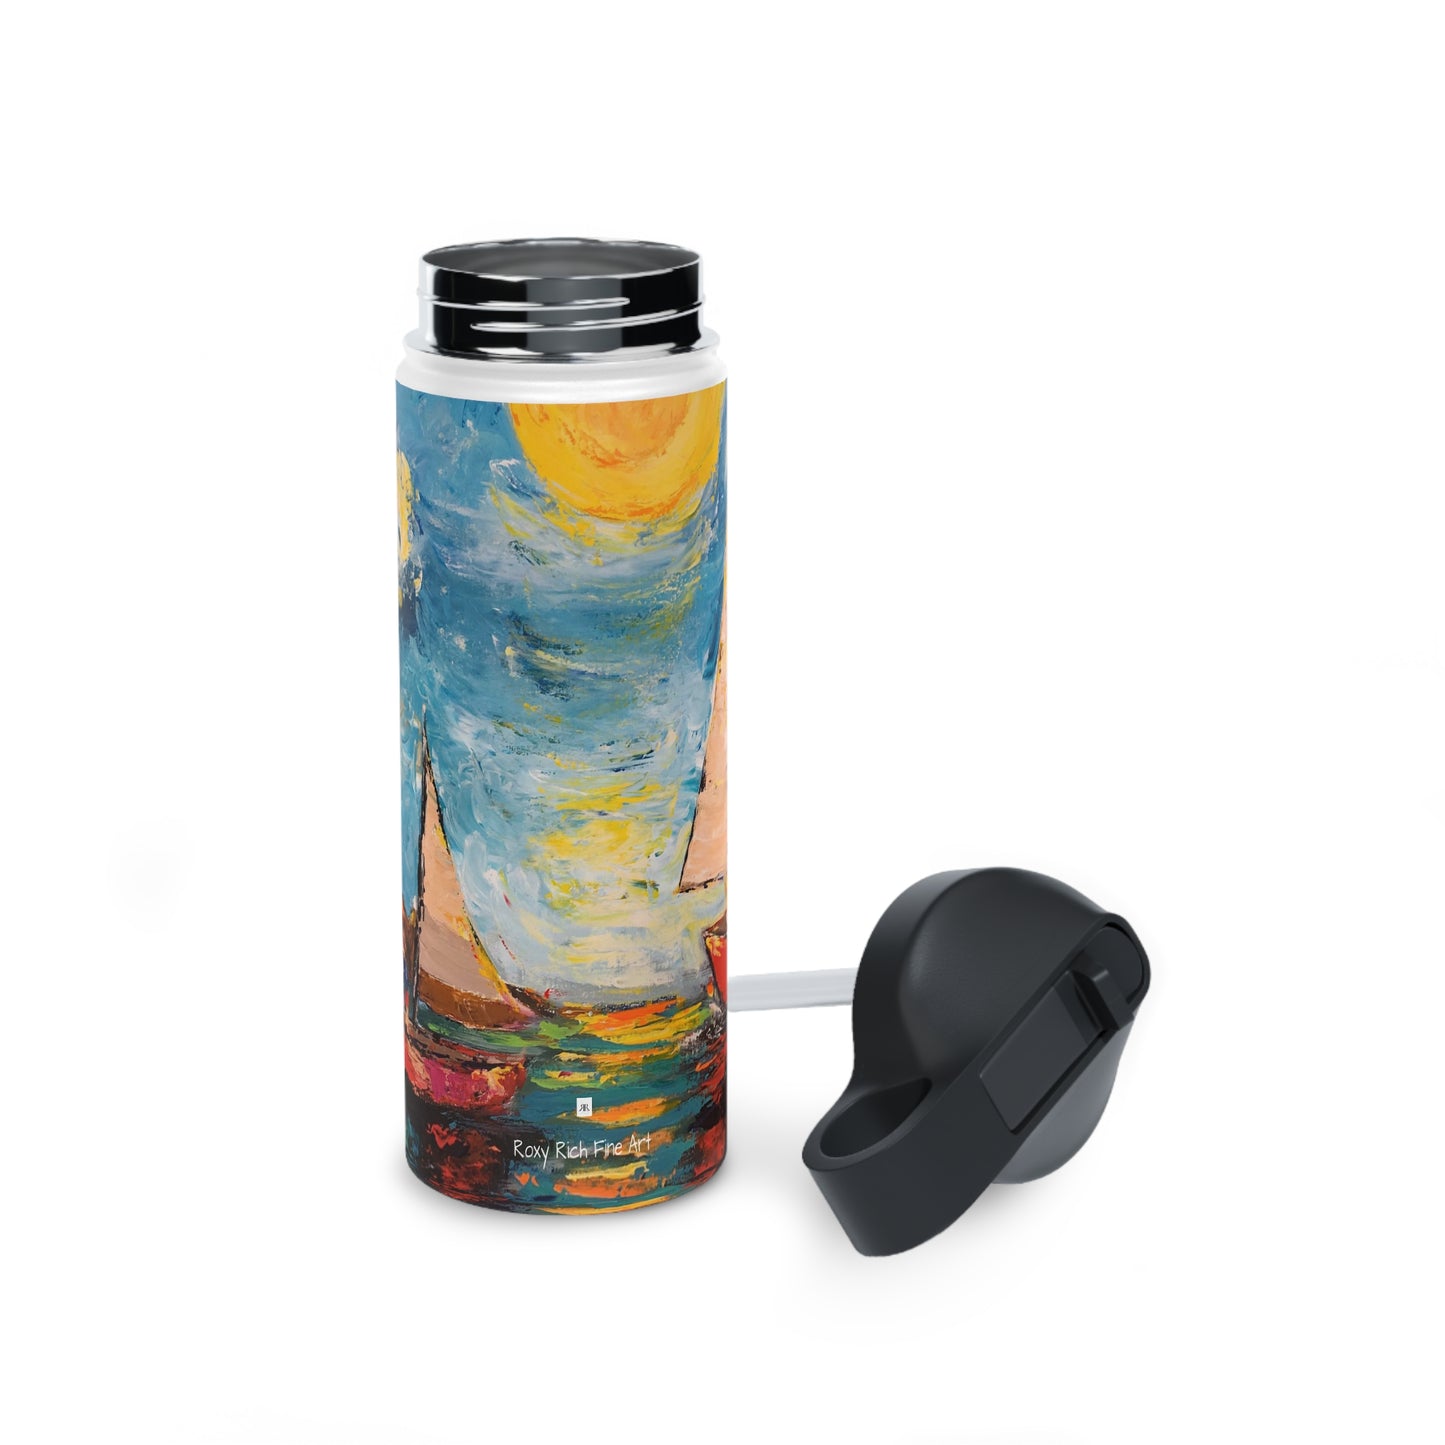 Sunny Sails- Stainless Steel Water Bottle, Standard Lid